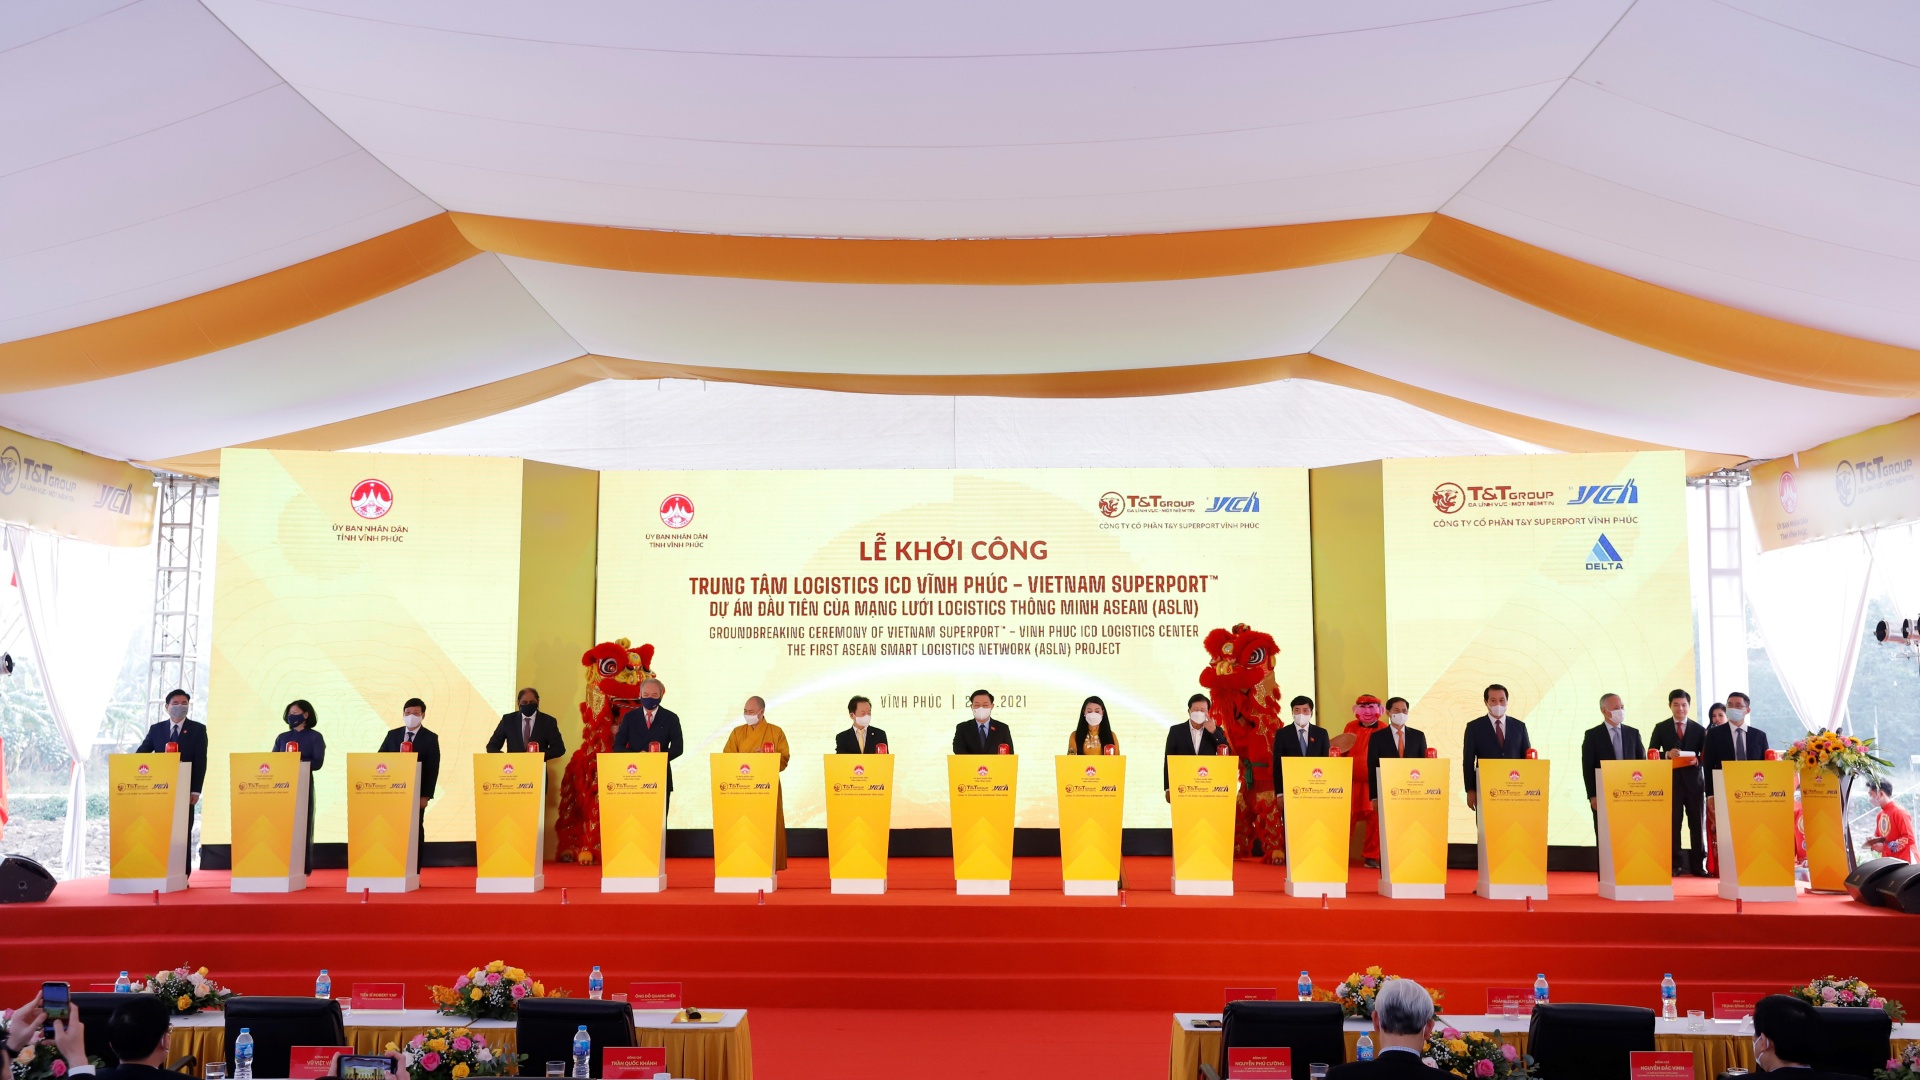 YCH Group and T&T Group break ground on Vietnam SuperPortTM logistic hub